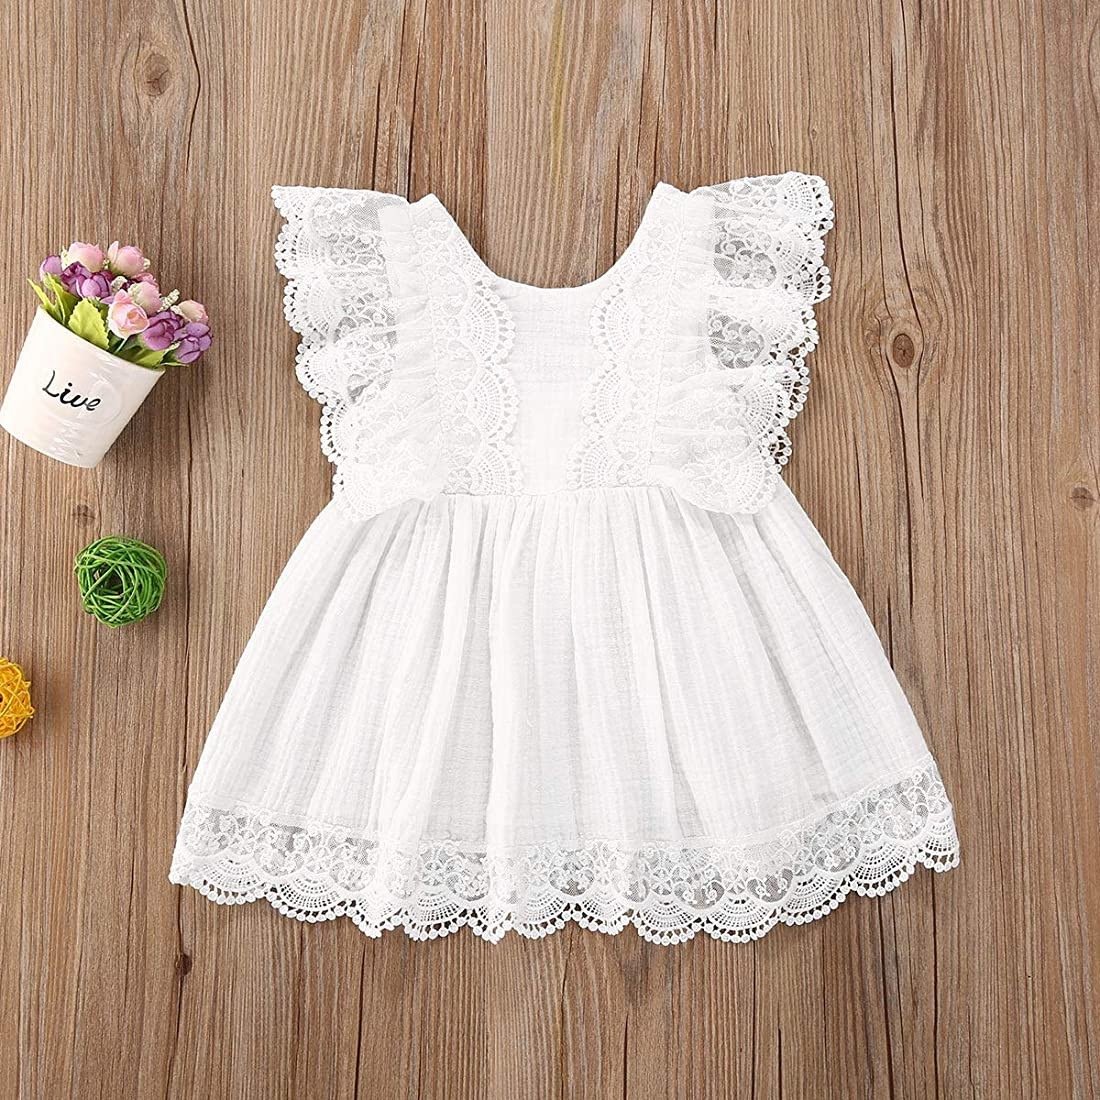 Baby/Todler lace 